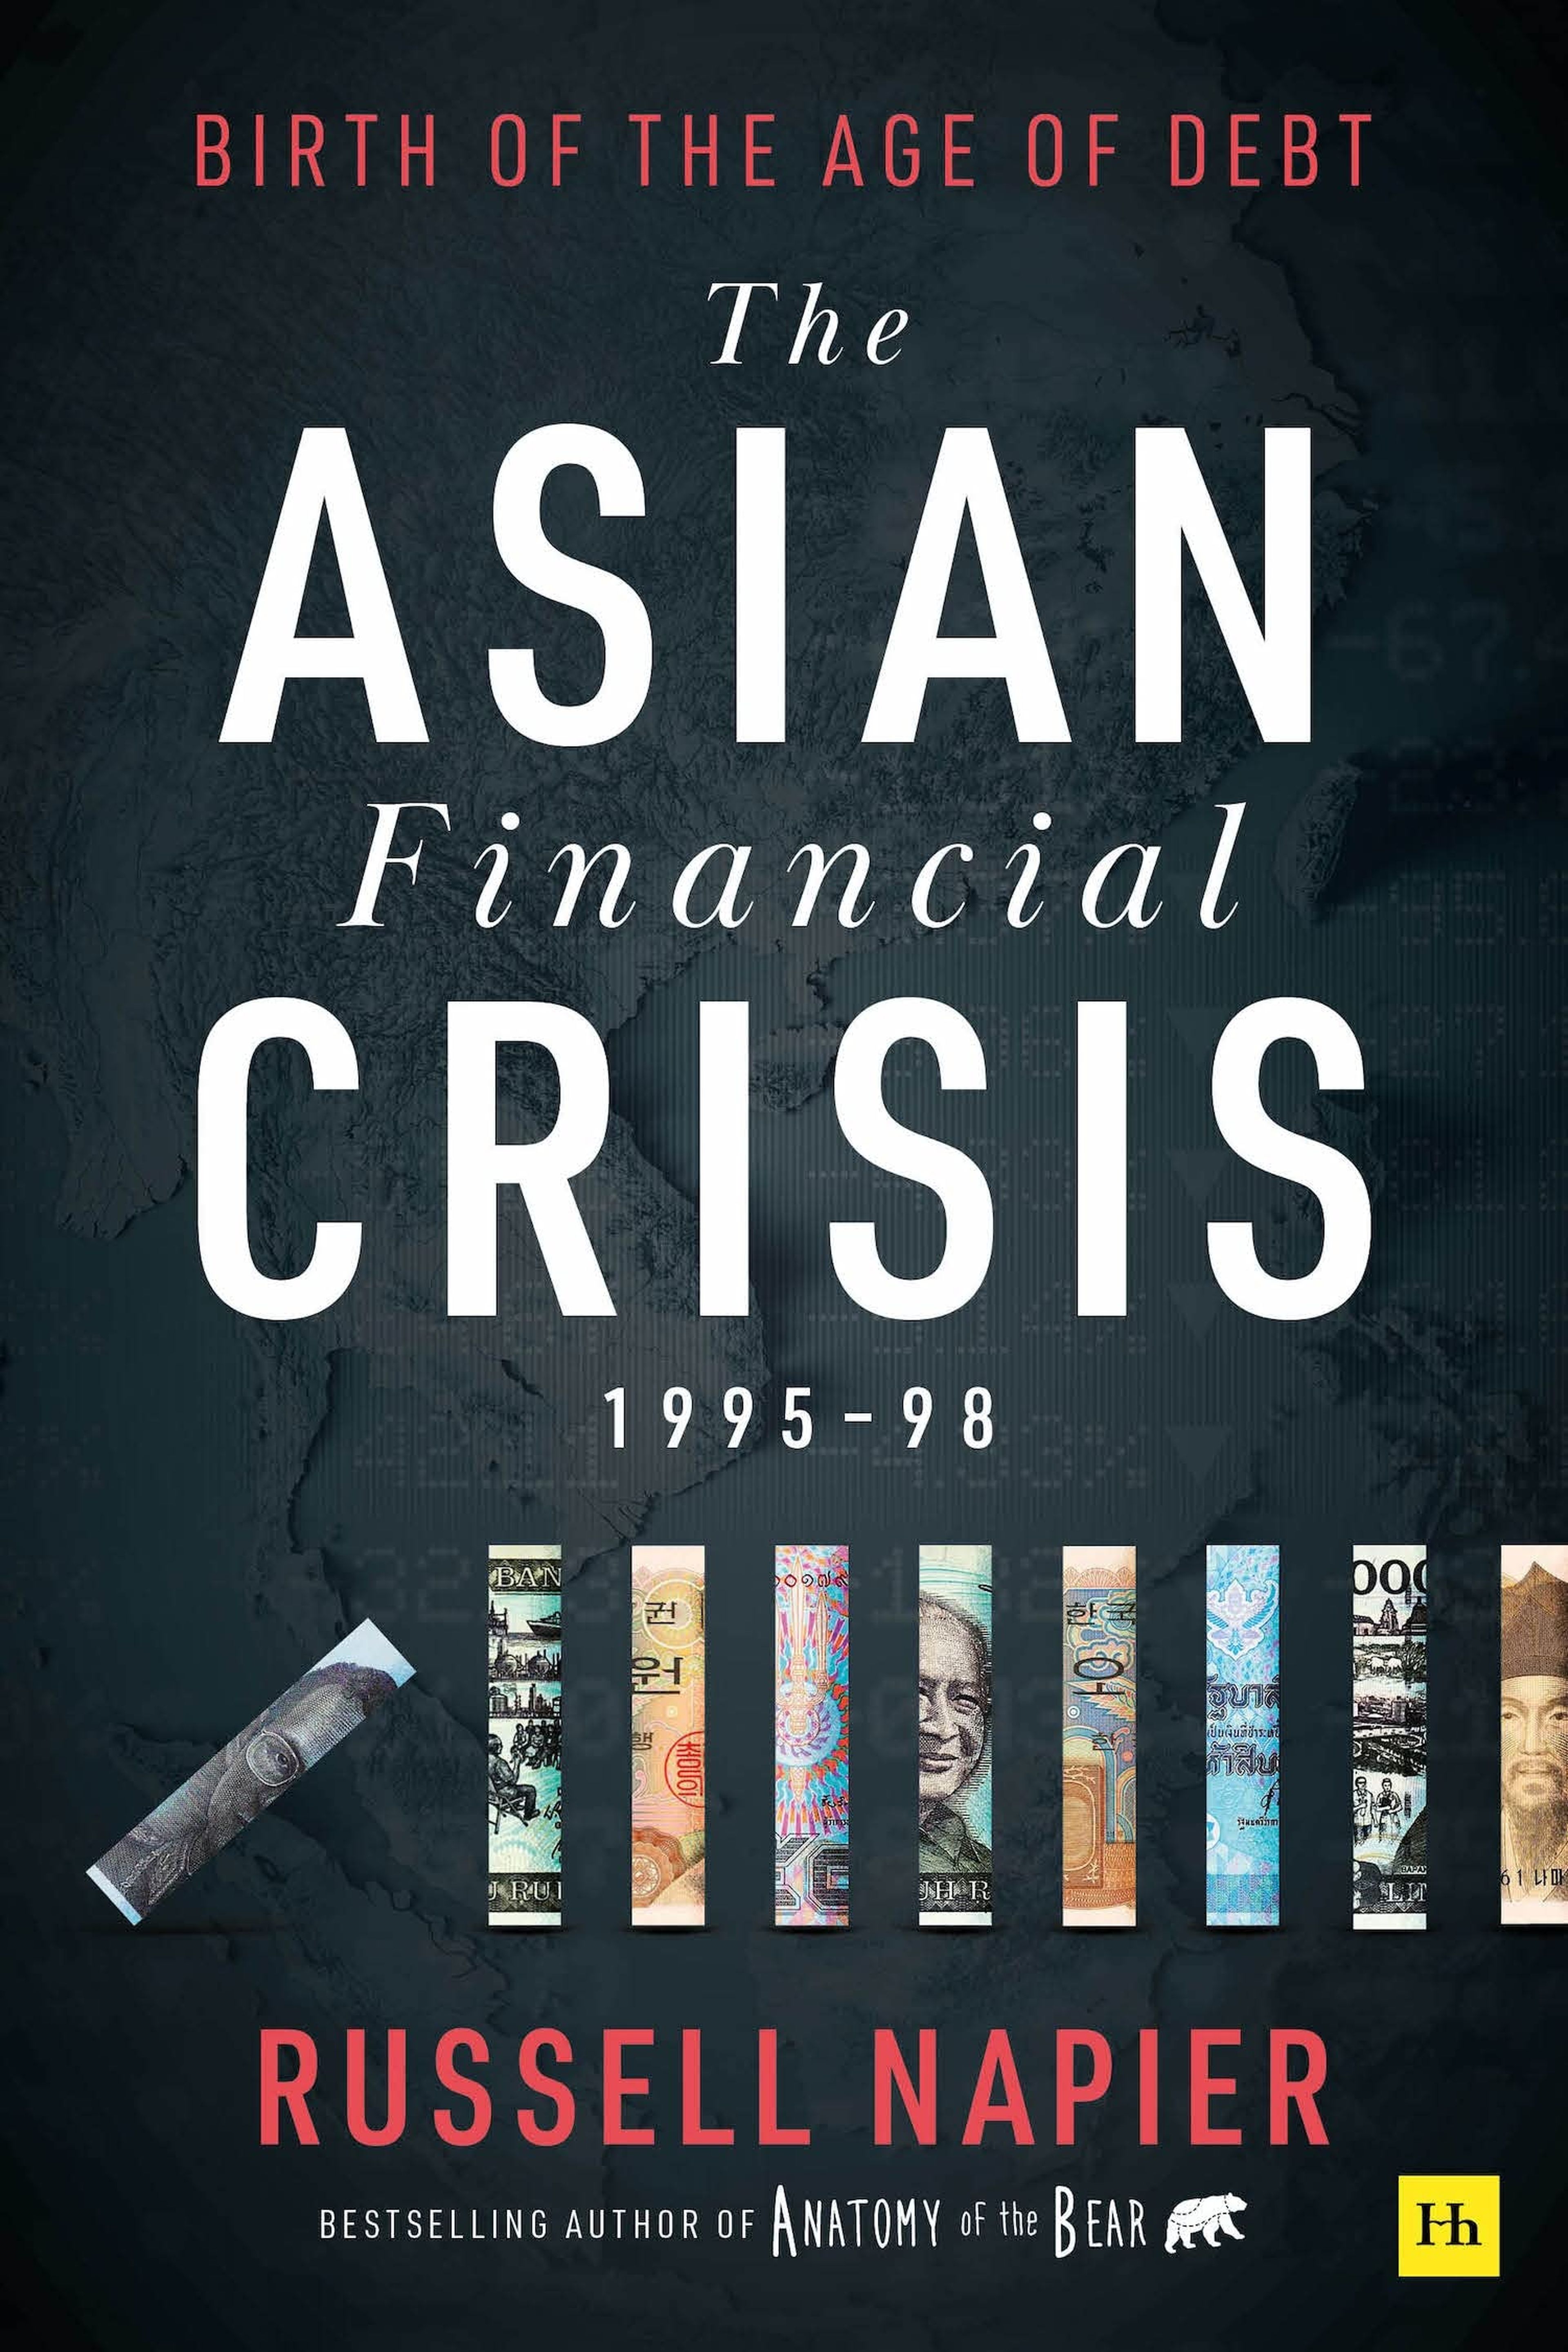 The Asian Financial Crisis 1995-98: Birth of the Age of Debt